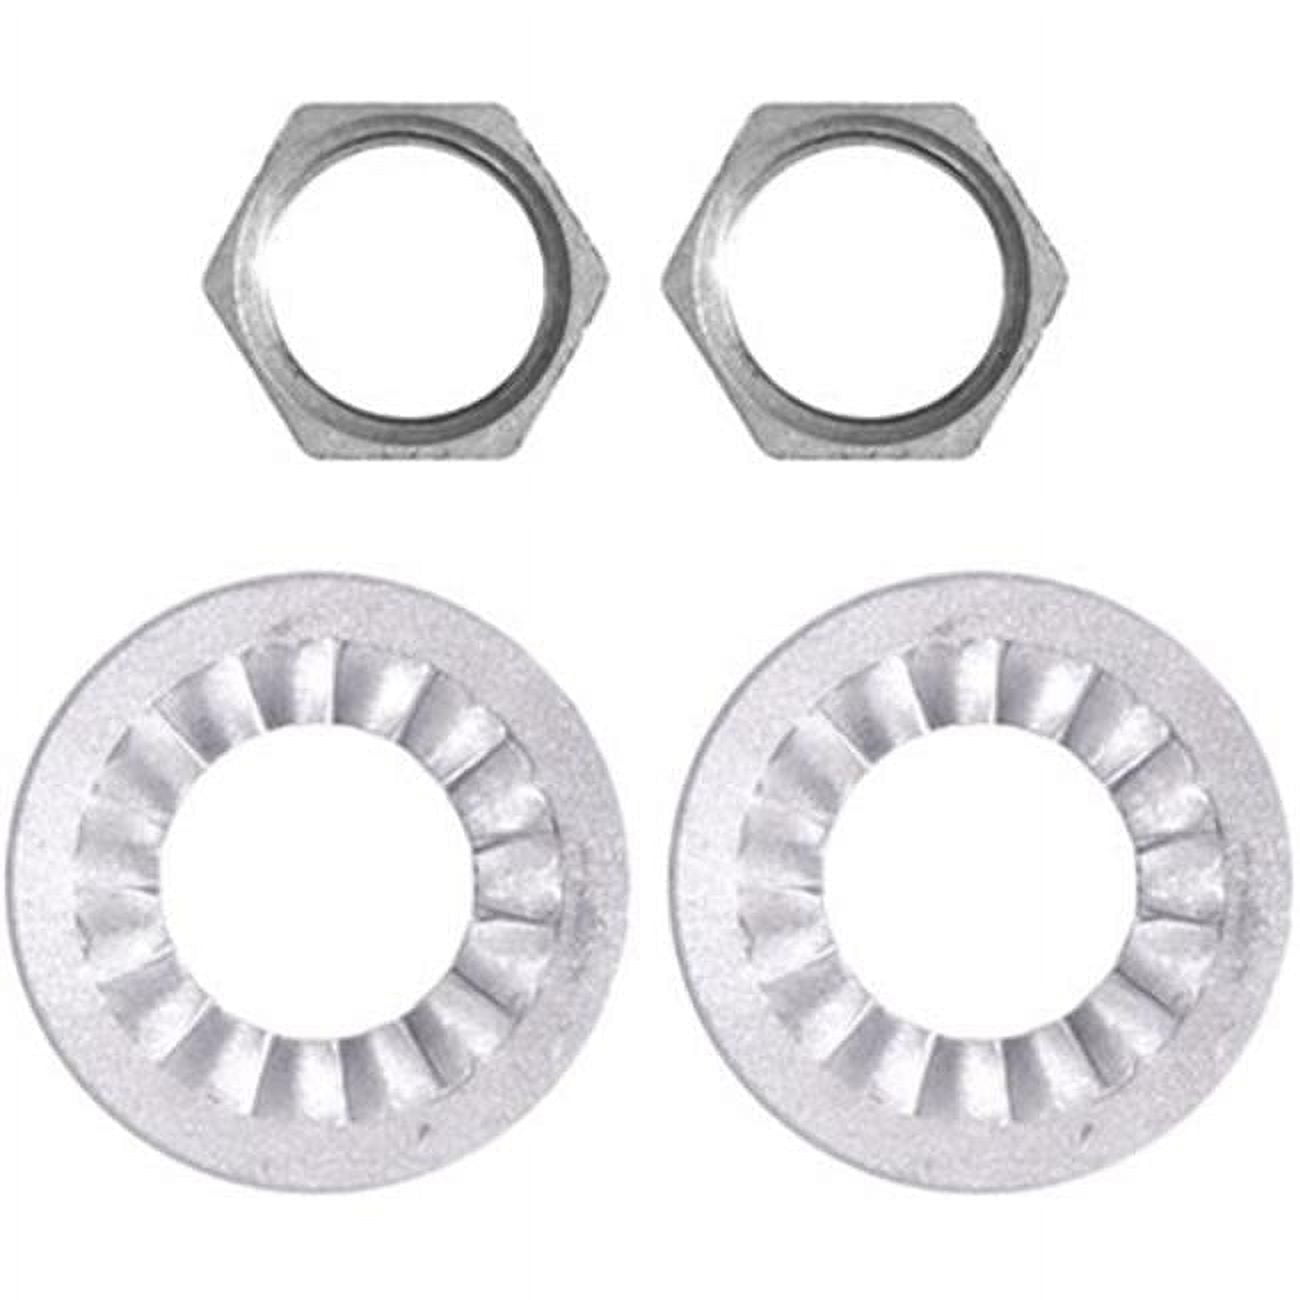 56030 Kitchen & Bathroom Faucet Nuts & Washers